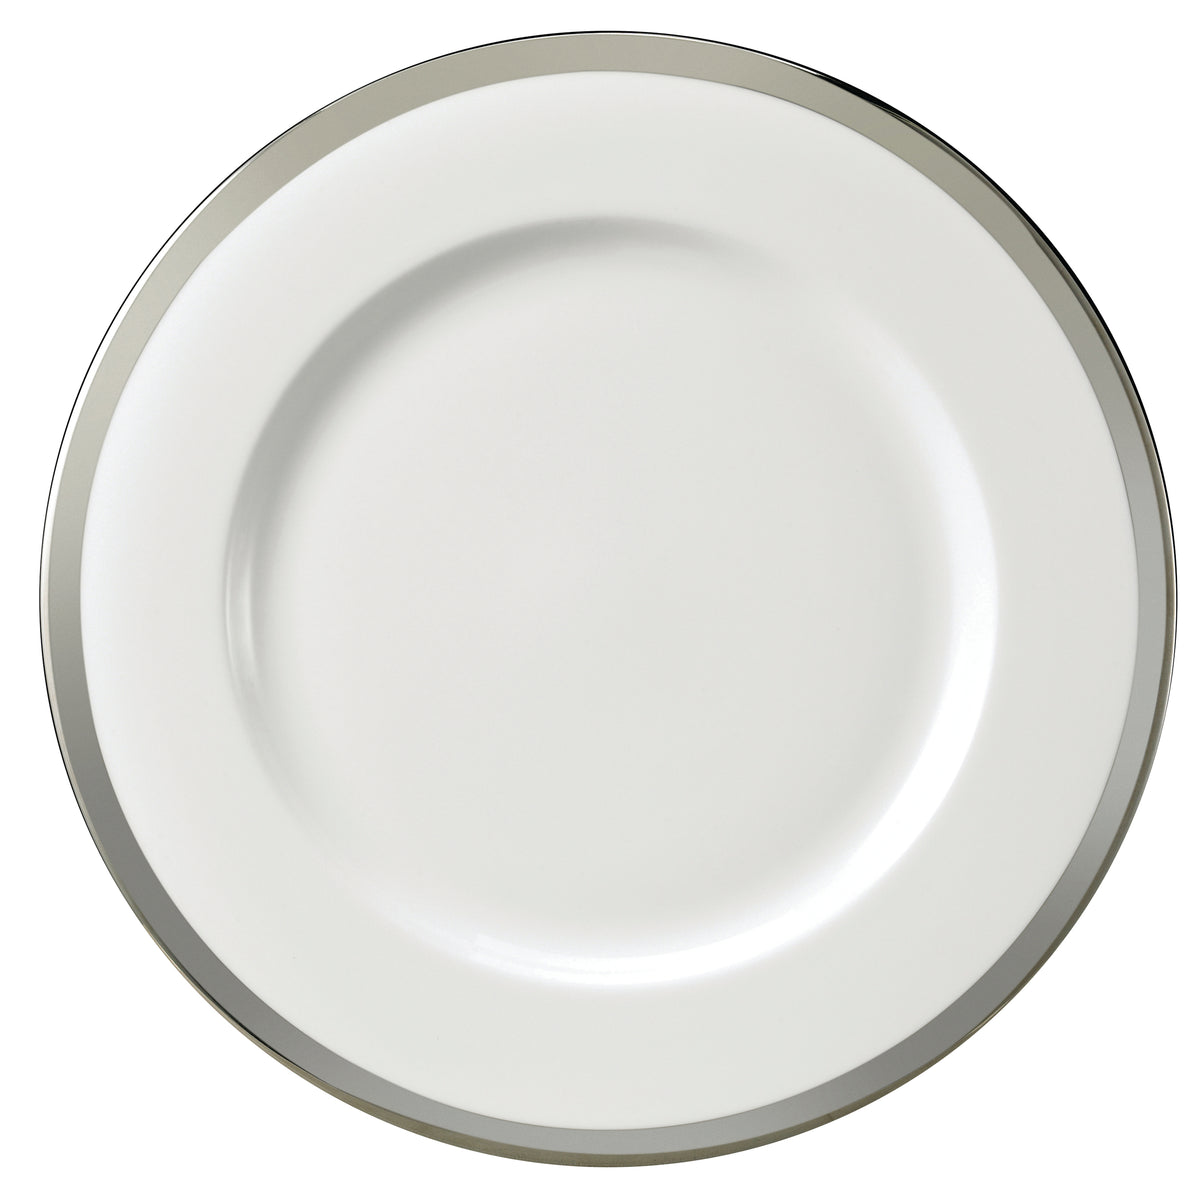 Diana - Charger Plate / Round Platter